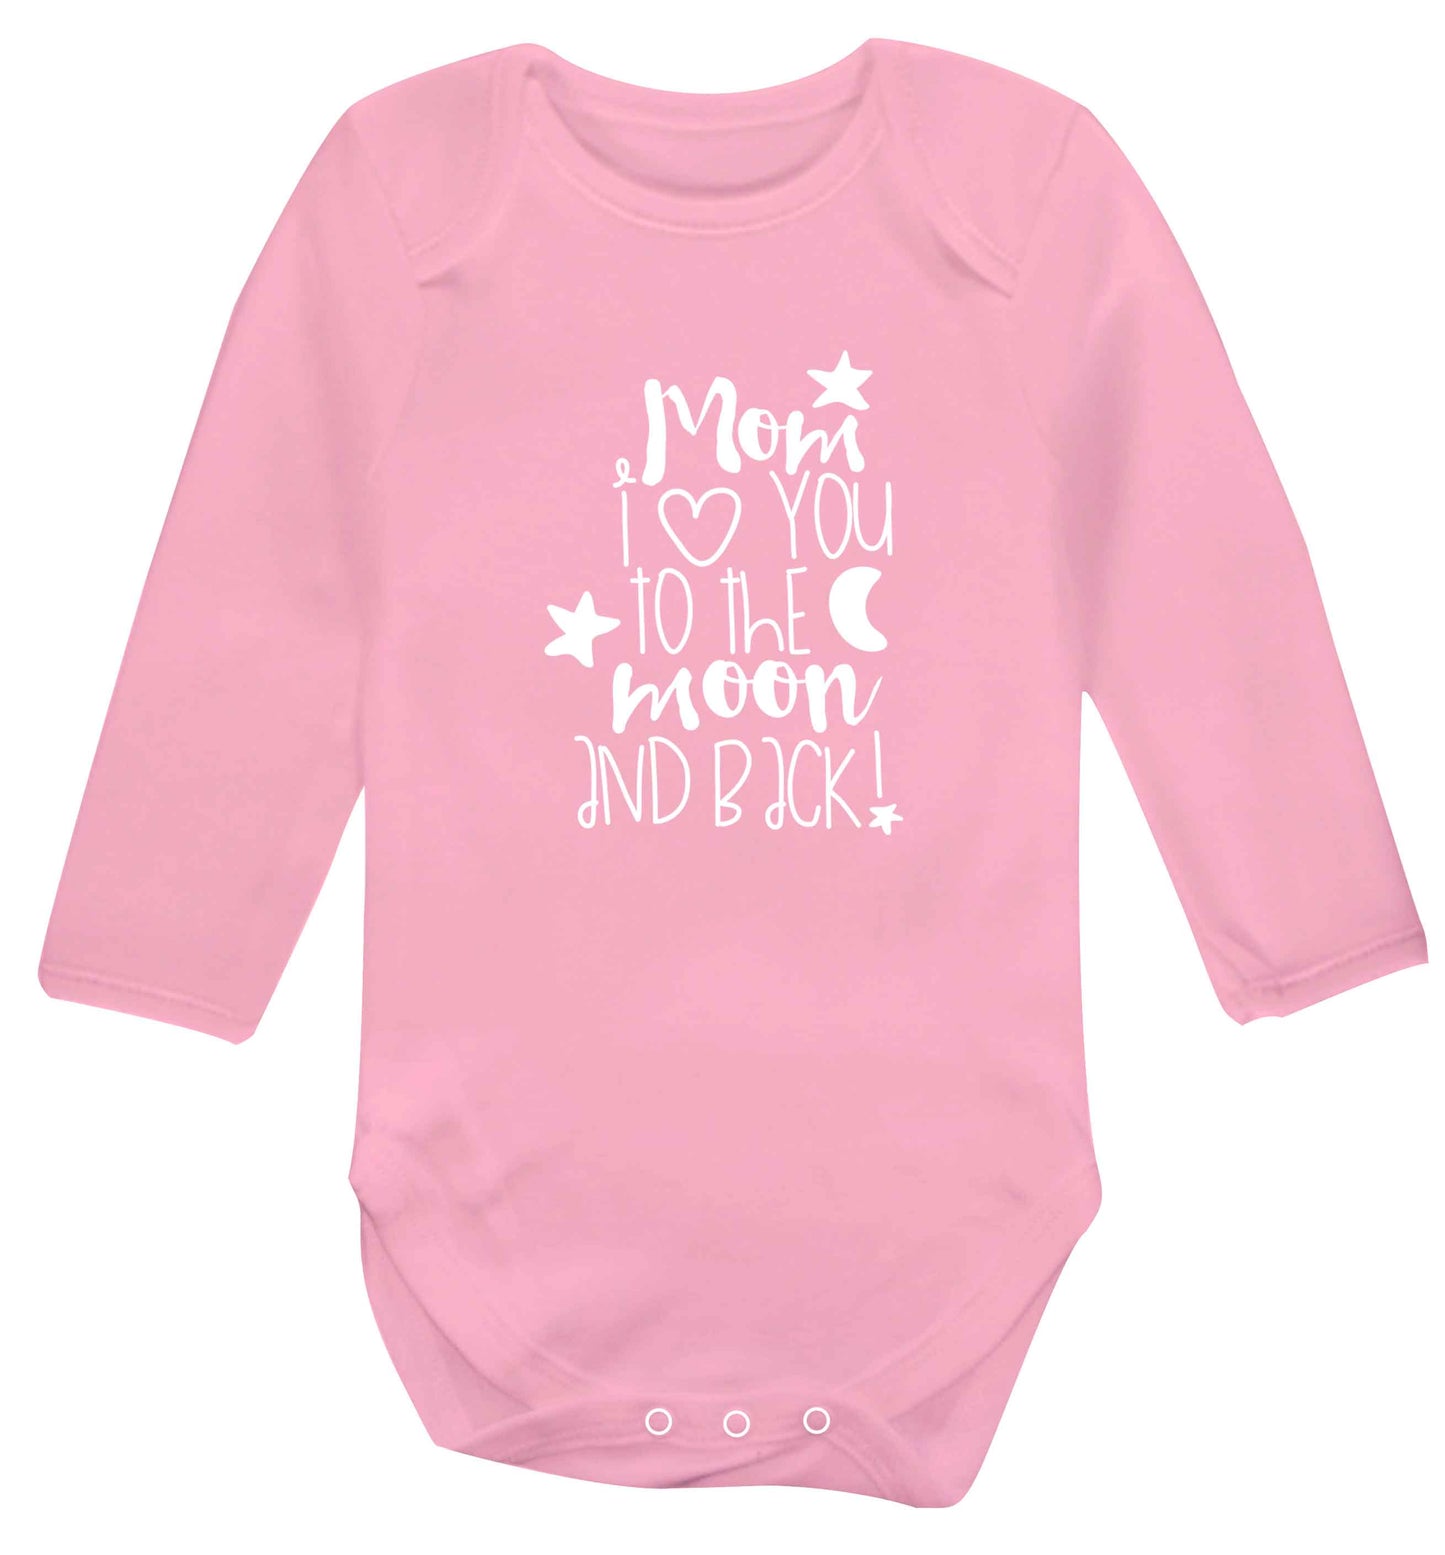 Mom I love you to the moon and back baby vest long sleeved pale pink 6-12 months